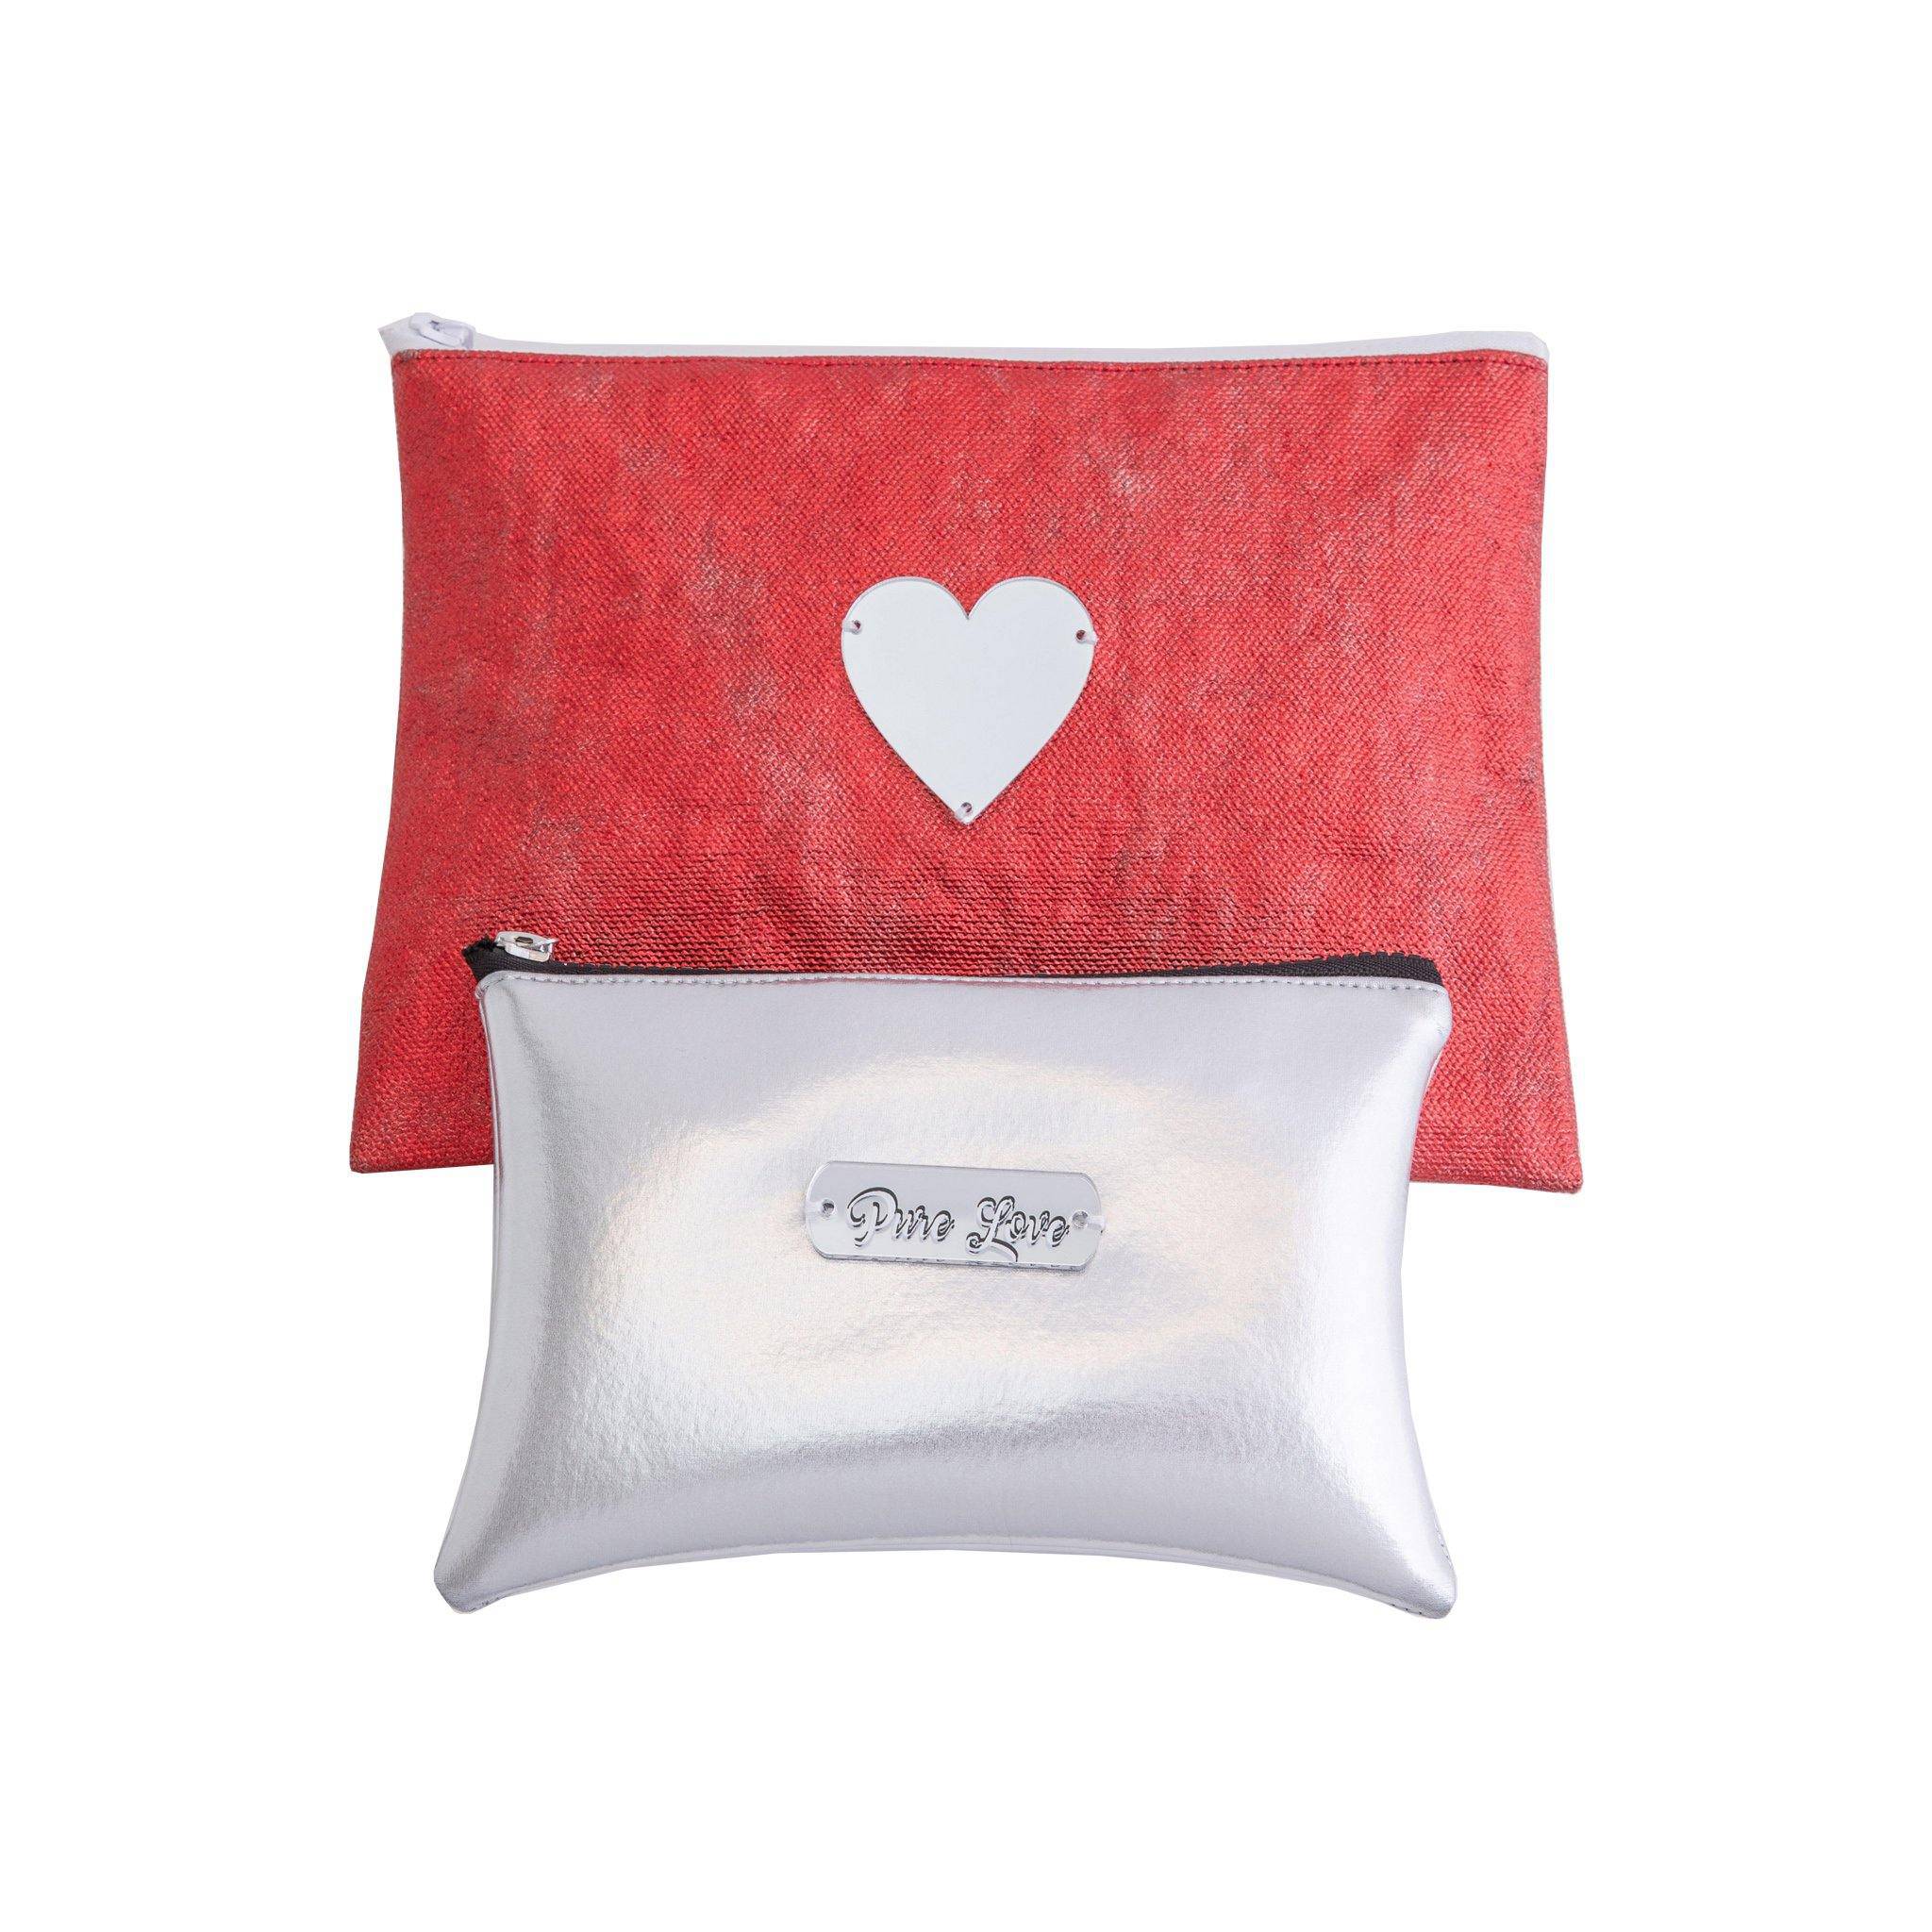 ZOO POUCH SET | Red Metallic Heart & Silver Disco Pure Love